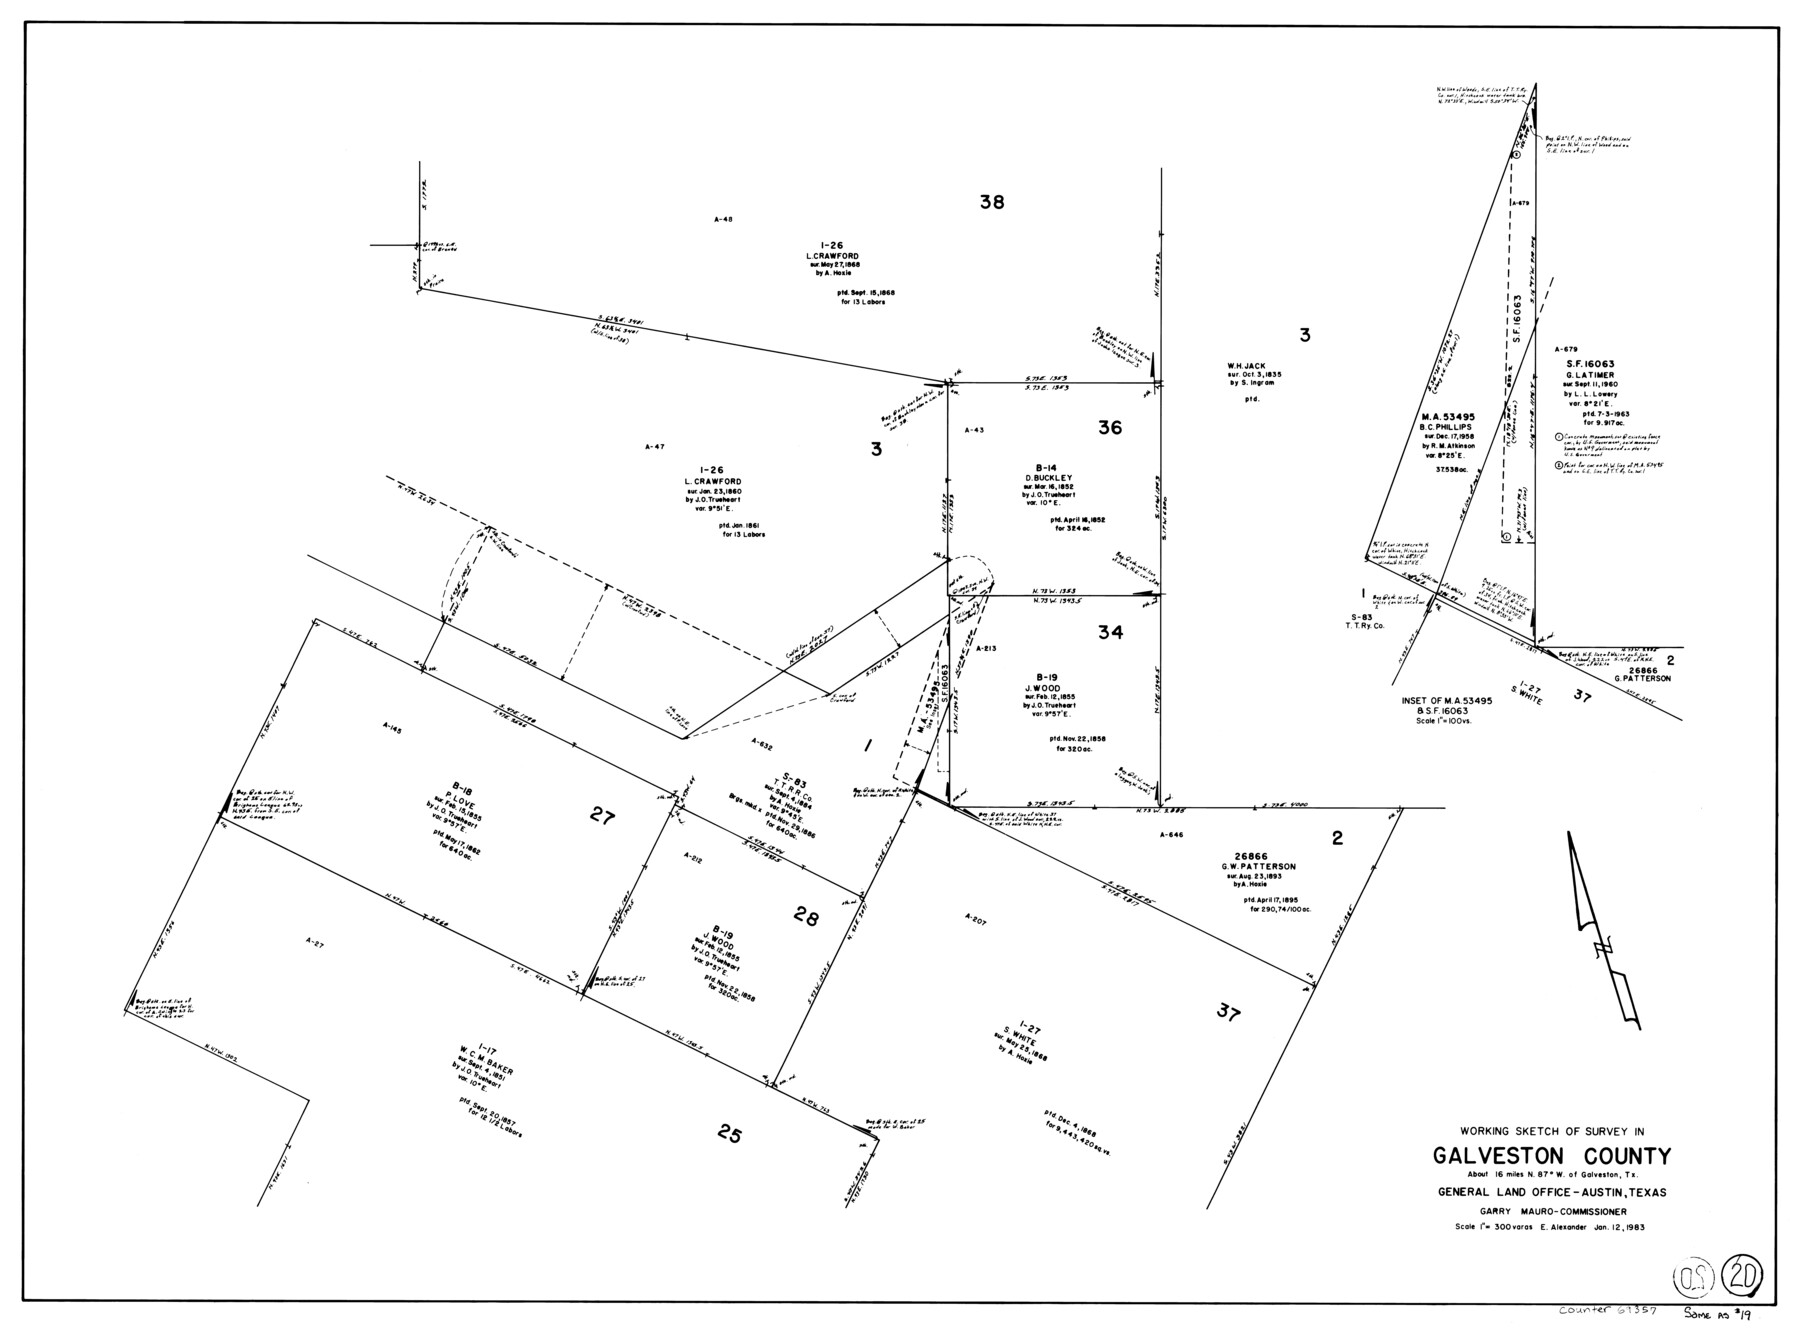 69357, Galveston County Working Sketch 20, General Map Collection